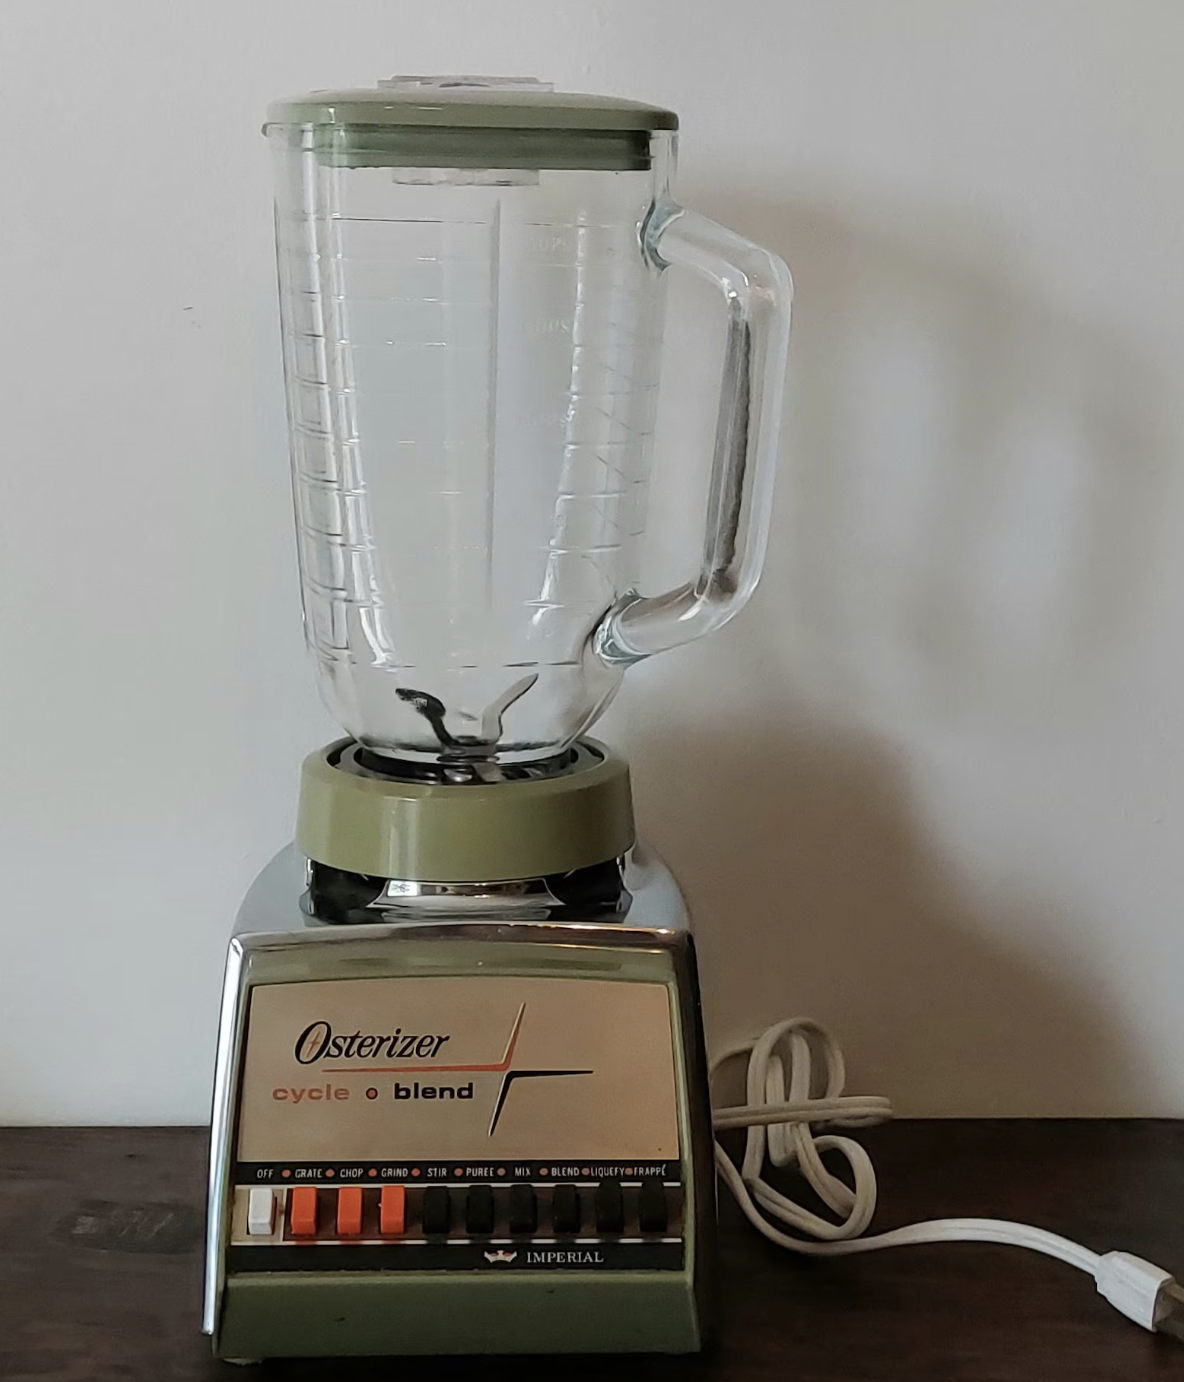 Osterizer Classic Vintage Blender with a glass jar and various speed settings. The brand name &quot;Osterizer&quot; and the model &quot;cycle blend&quot; are clearly visible